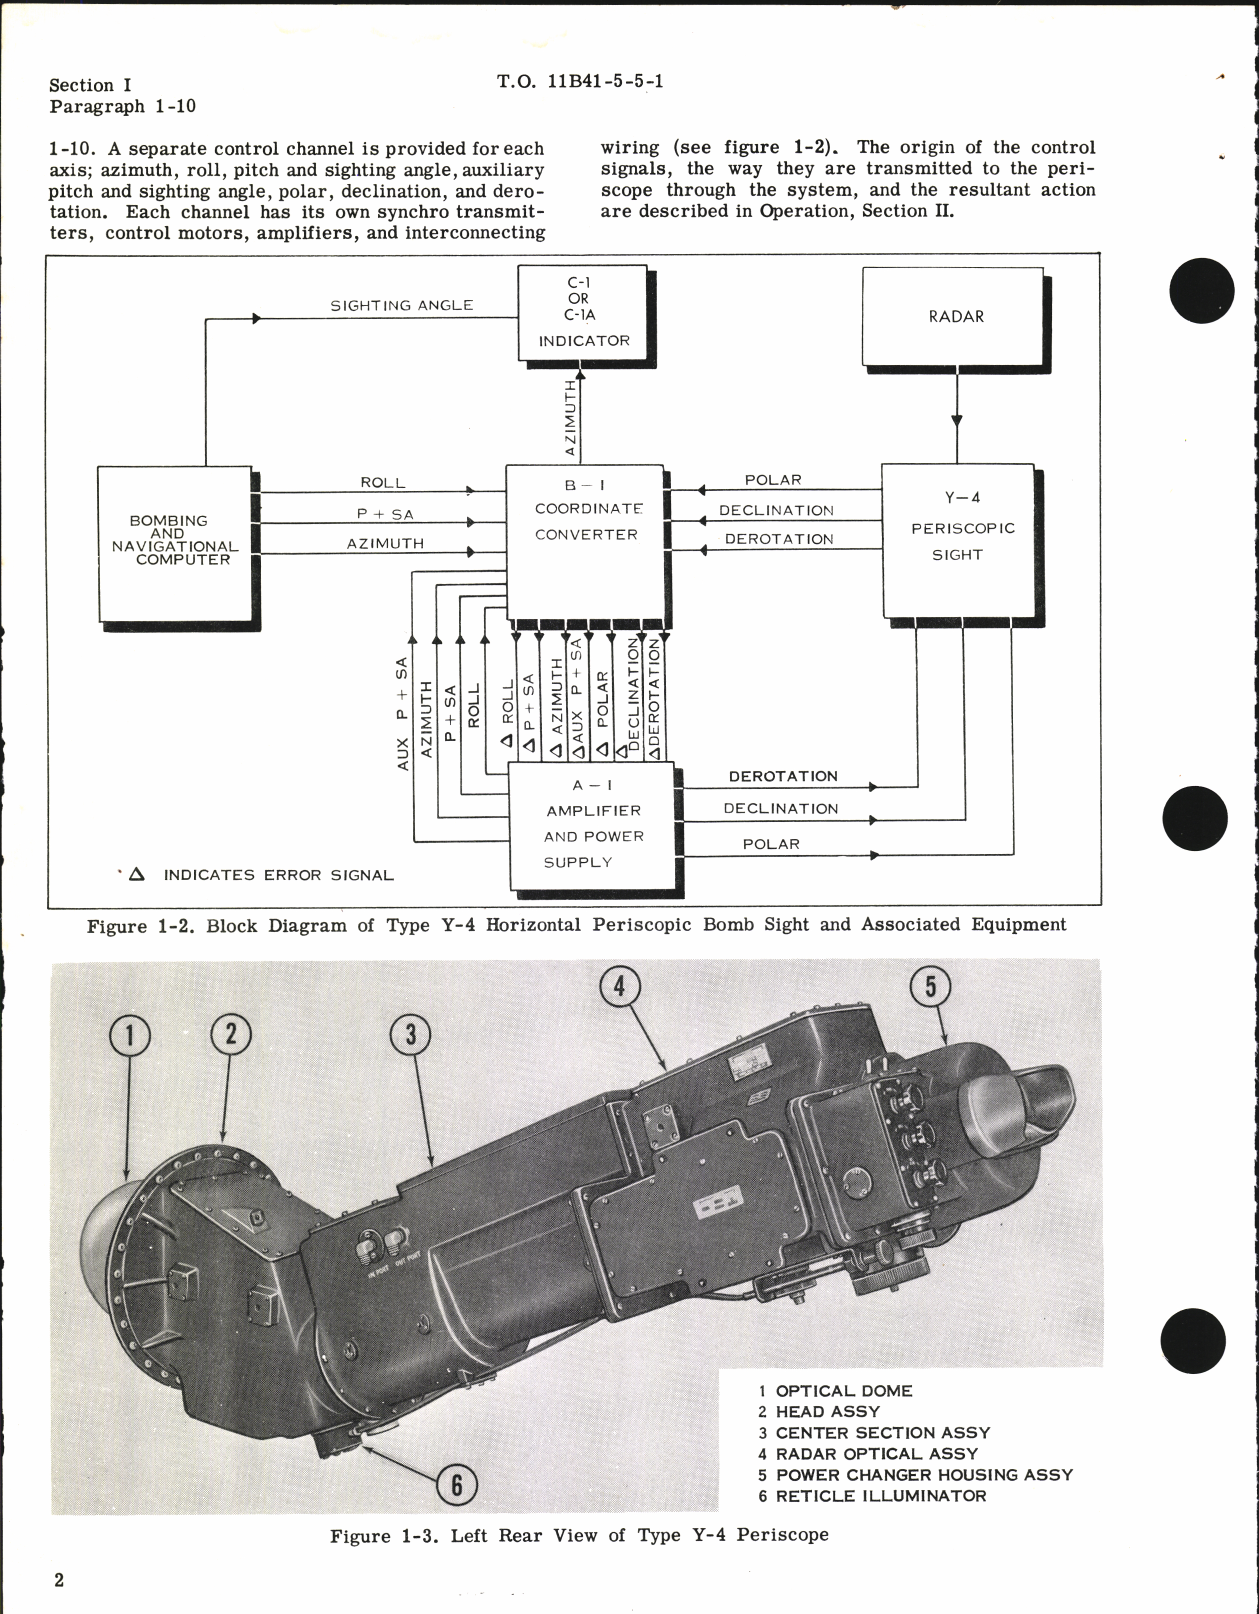 Sample page 6 from AirCorps Library document: Operation and Service Instructions for Type Y-4 Horizontal Periscopic Bombsight